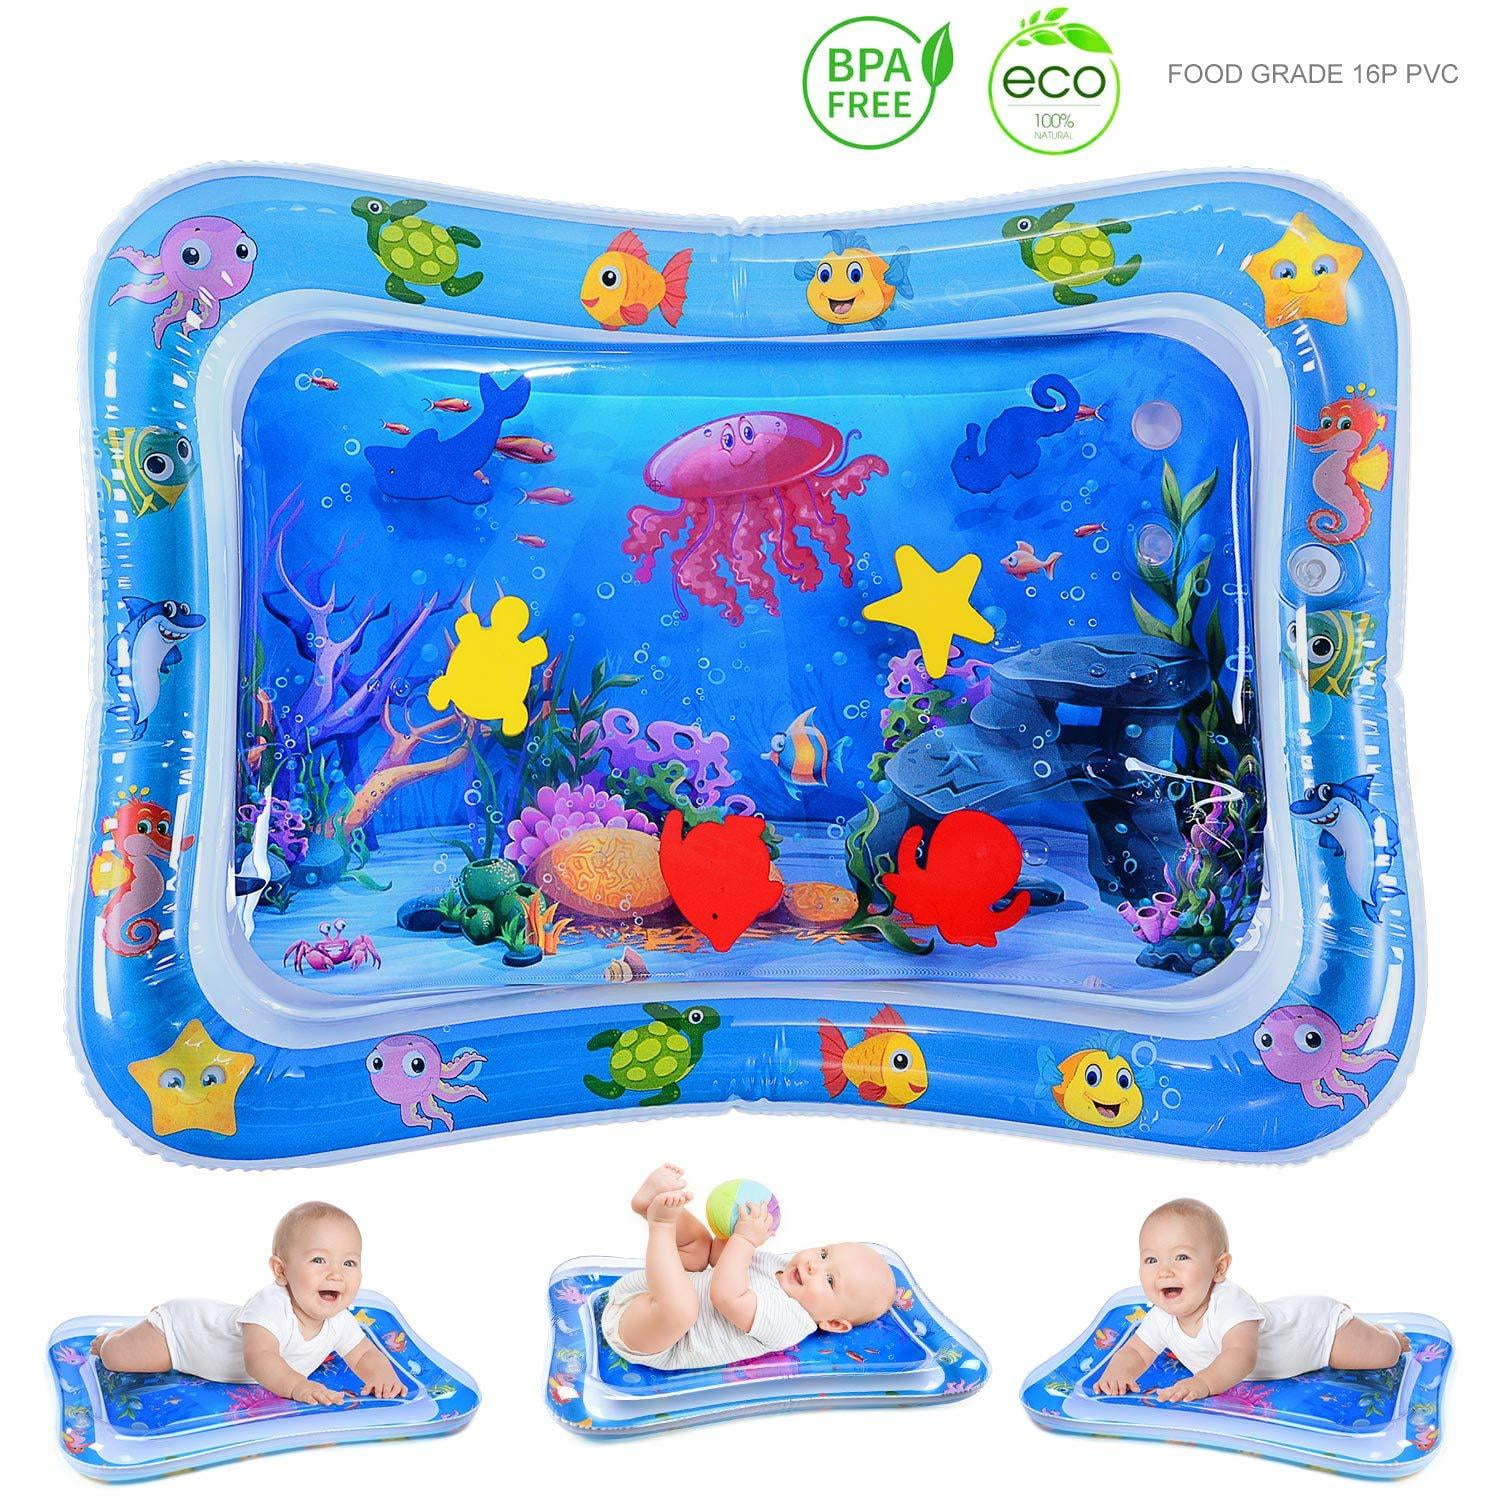 Tummy Time Baby Water Mat Infant Inflatable Play Mat for 3 6 9 Months Newborn Boy Girl Duck shape Early Stimulation Sensory Toys Baby Activity Center Fun Colorful Toddlers Playmat Activity Gym 